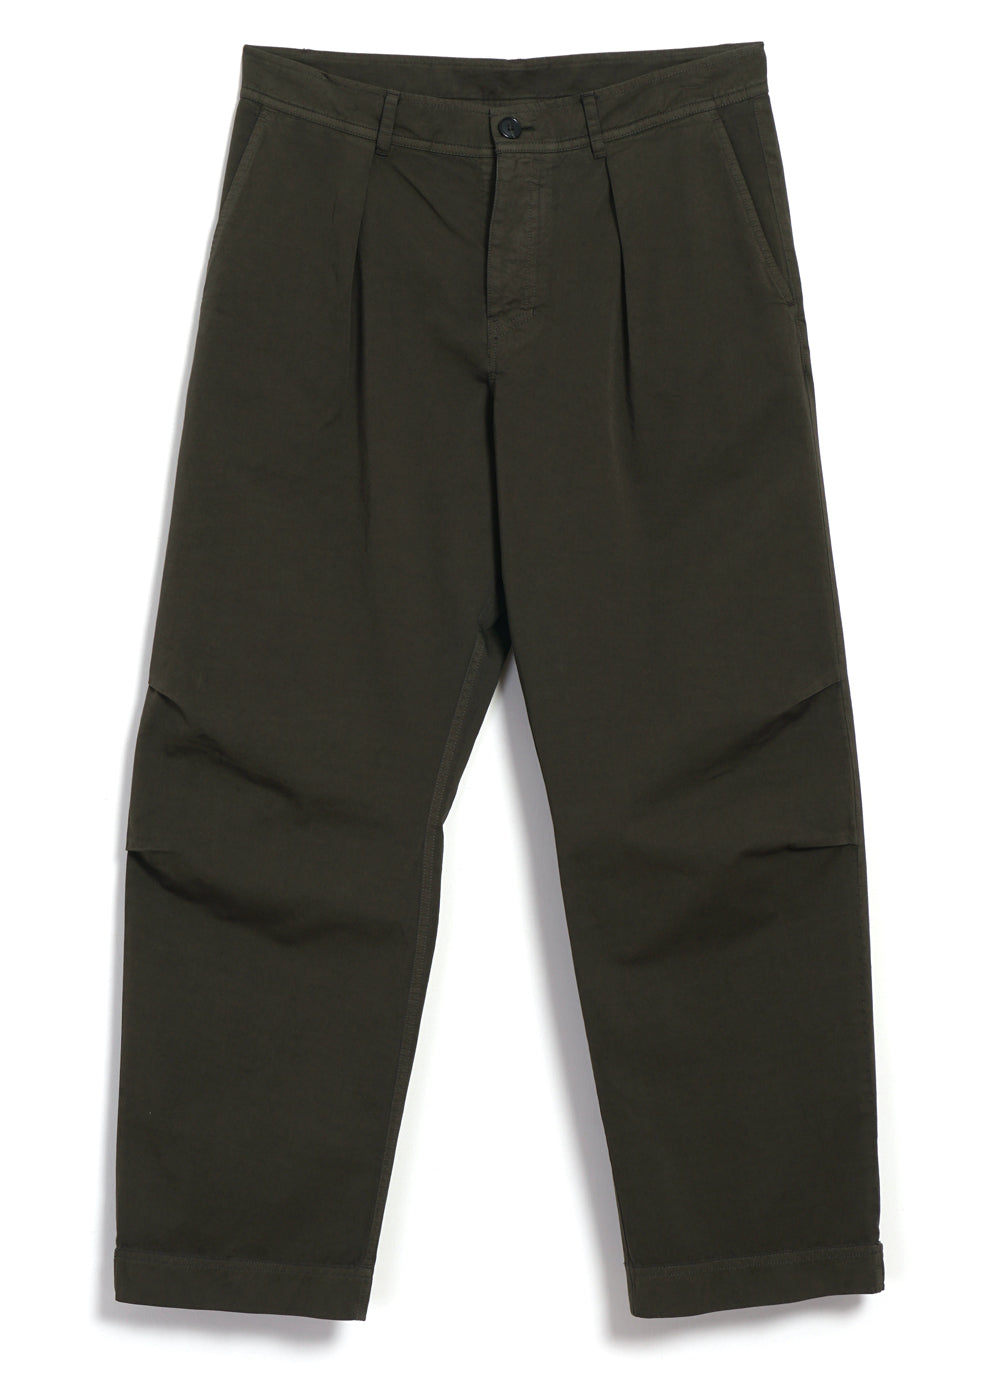 KARLO | Wide Pleated Trousers | Olive Drill